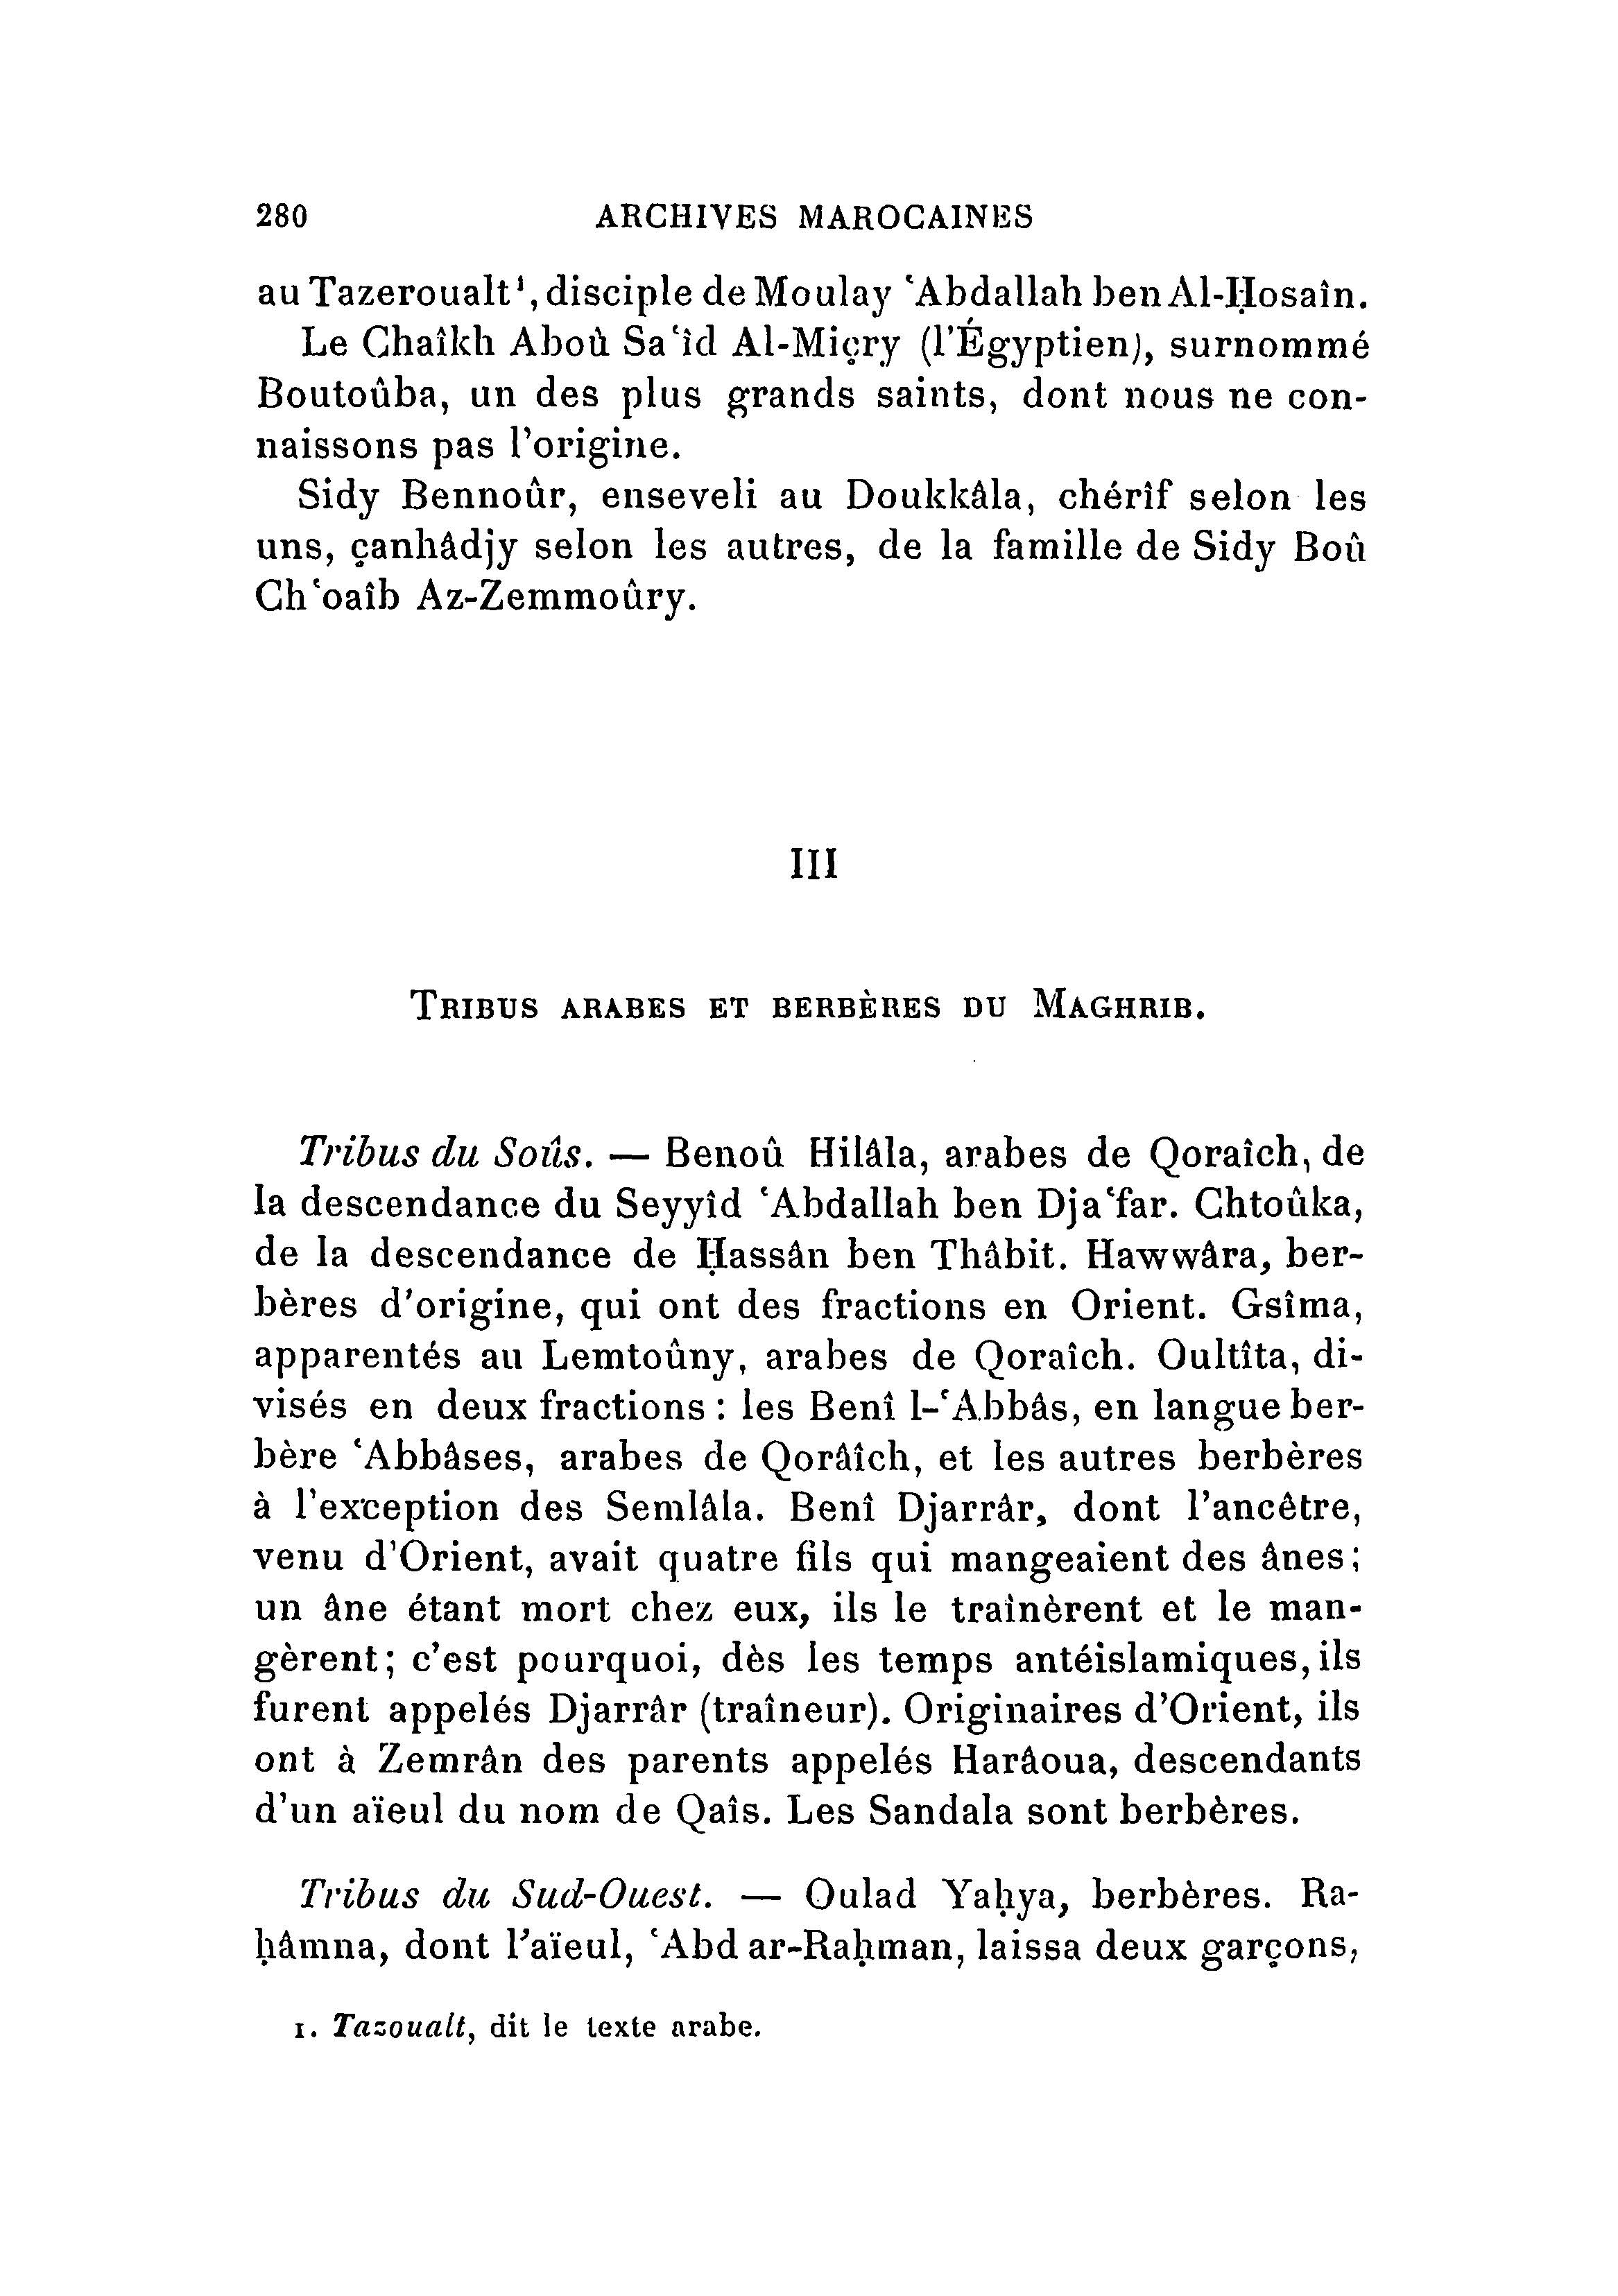 archives_marocaines-vol-2_1_page_455